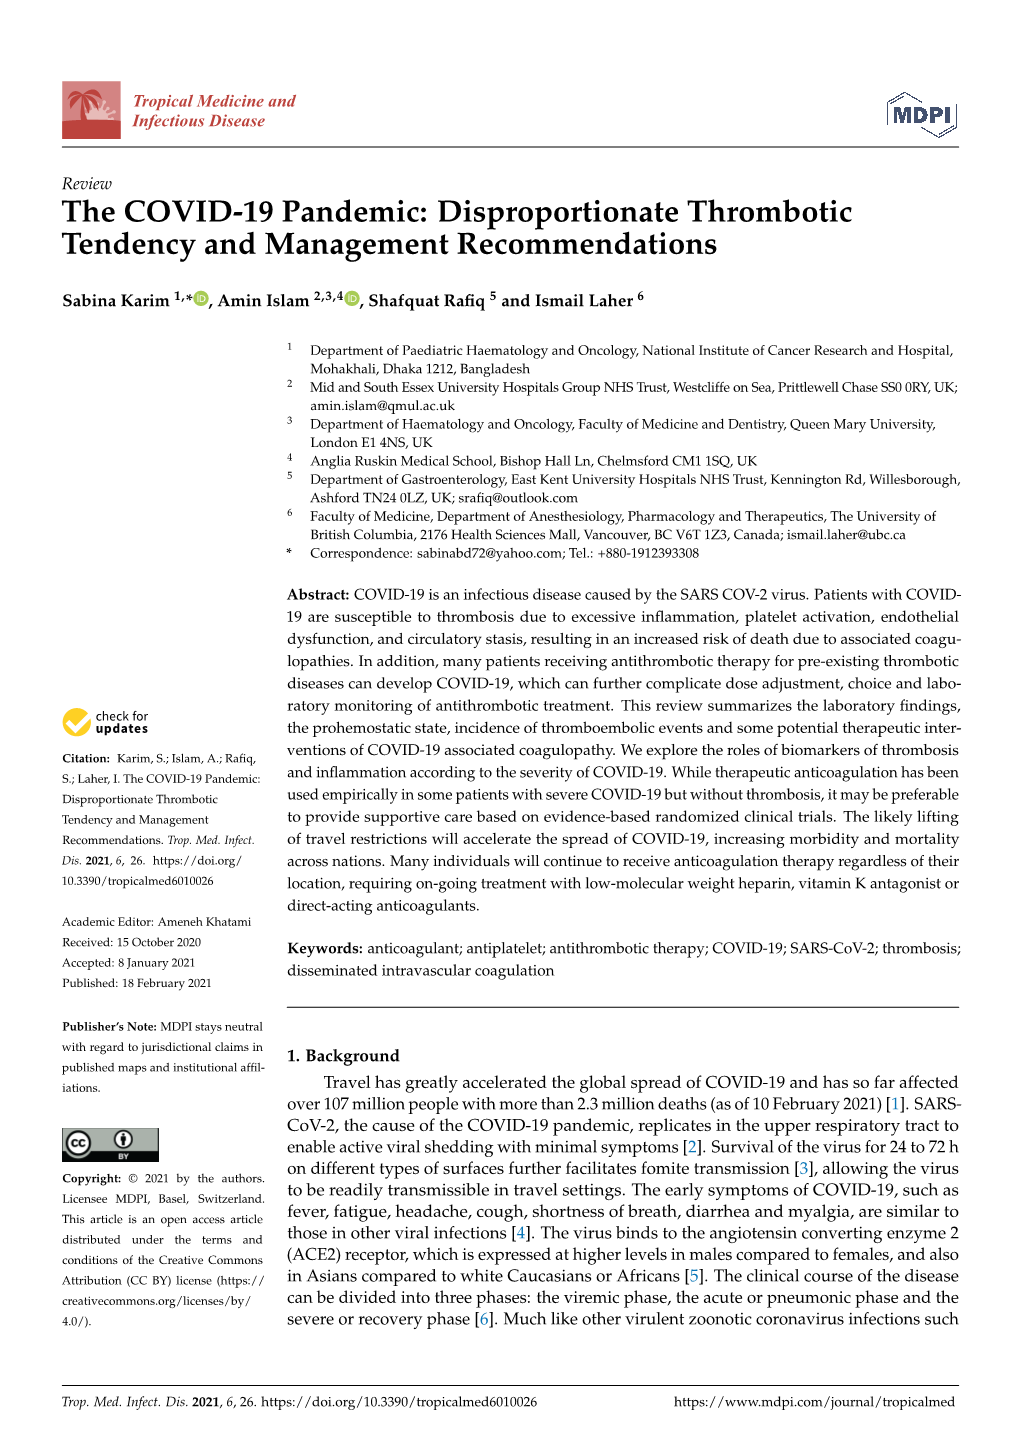 The COVID-19 Pandemic: Disproportionate Thrombotic Tendency and Management Recommendations